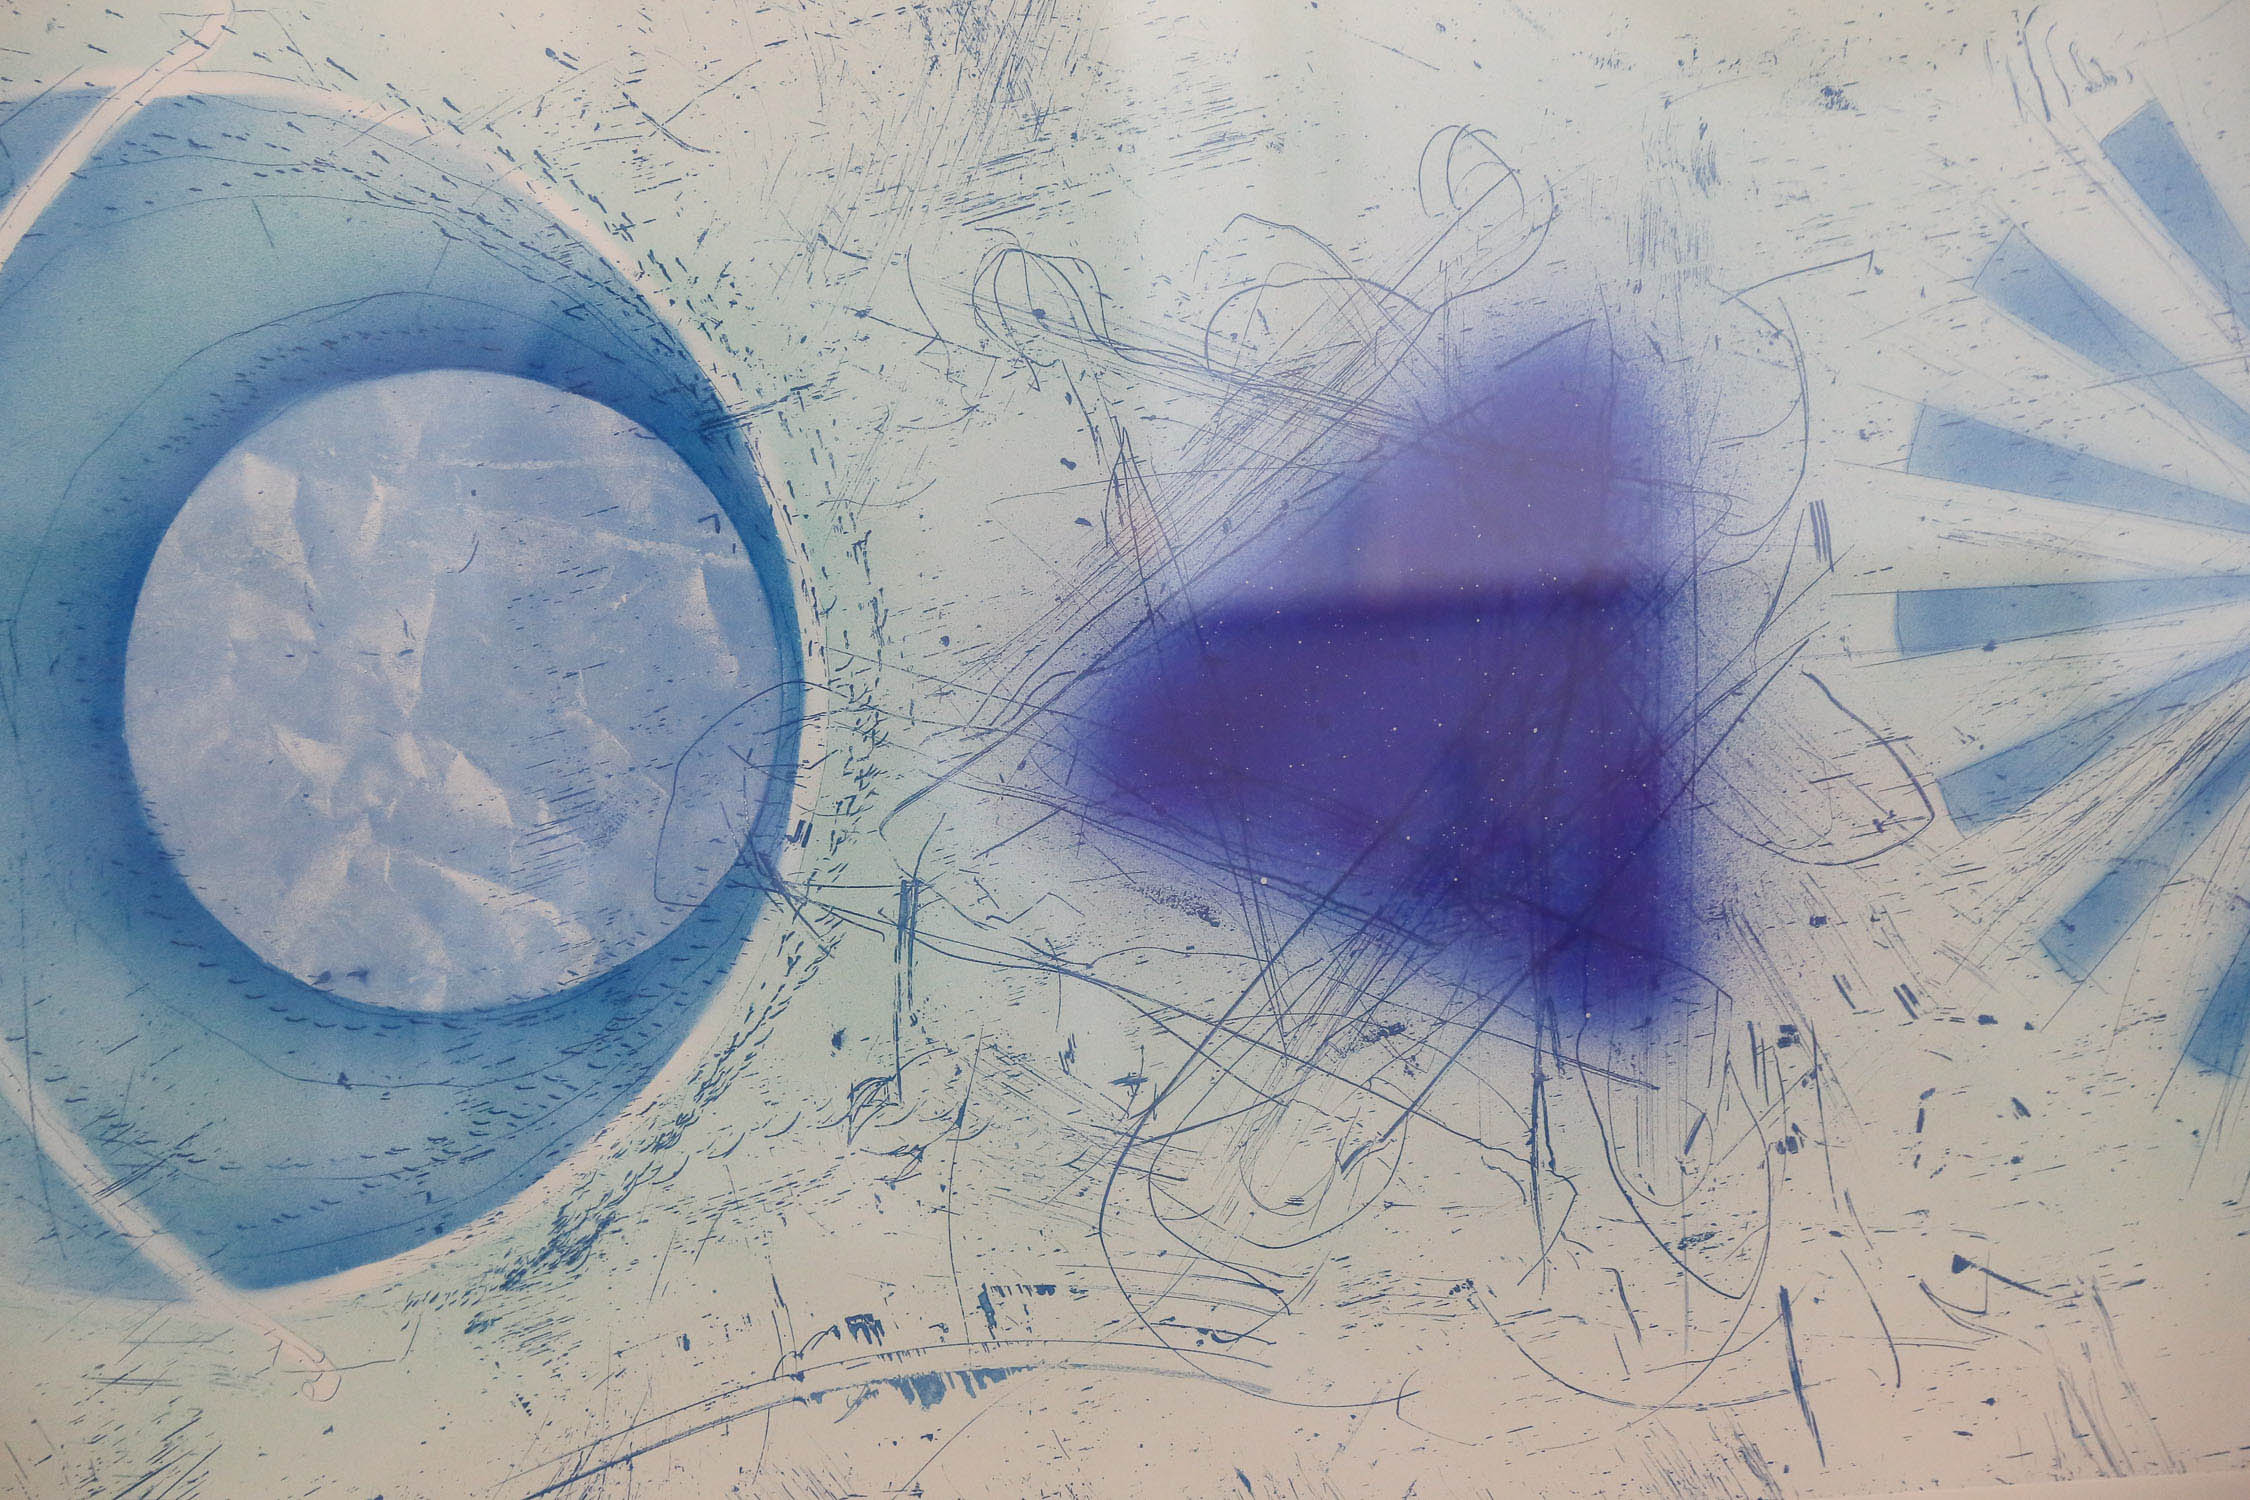 Blue & White J. Rosenquist Signed & Numbered Photo-Etching Aquatint, Rinse, 1978 In Good Condition For Sale In Houston, TX